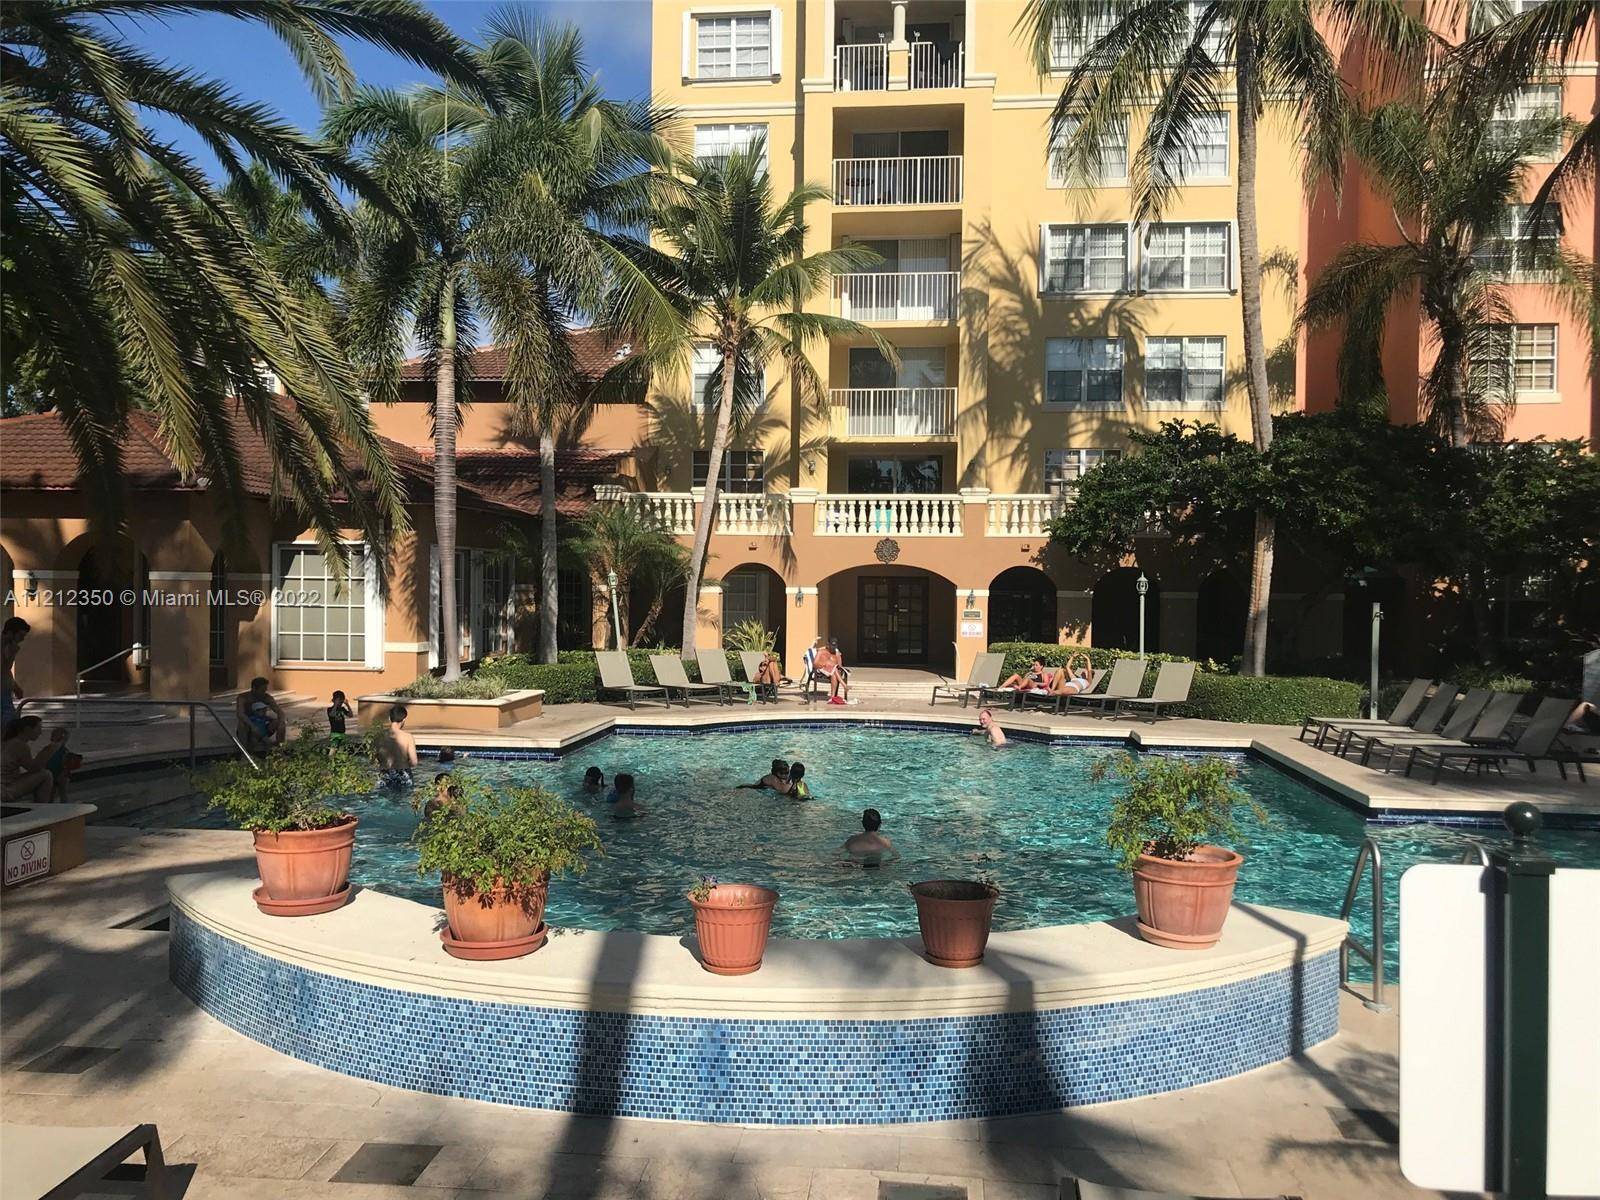 This beautiful 2bed 2bath fully furnished apartment is located at the prestigious The Yacht Club at Aventura, only 3 minutes away from the Aventura Mall and the Sunny Isles beach.